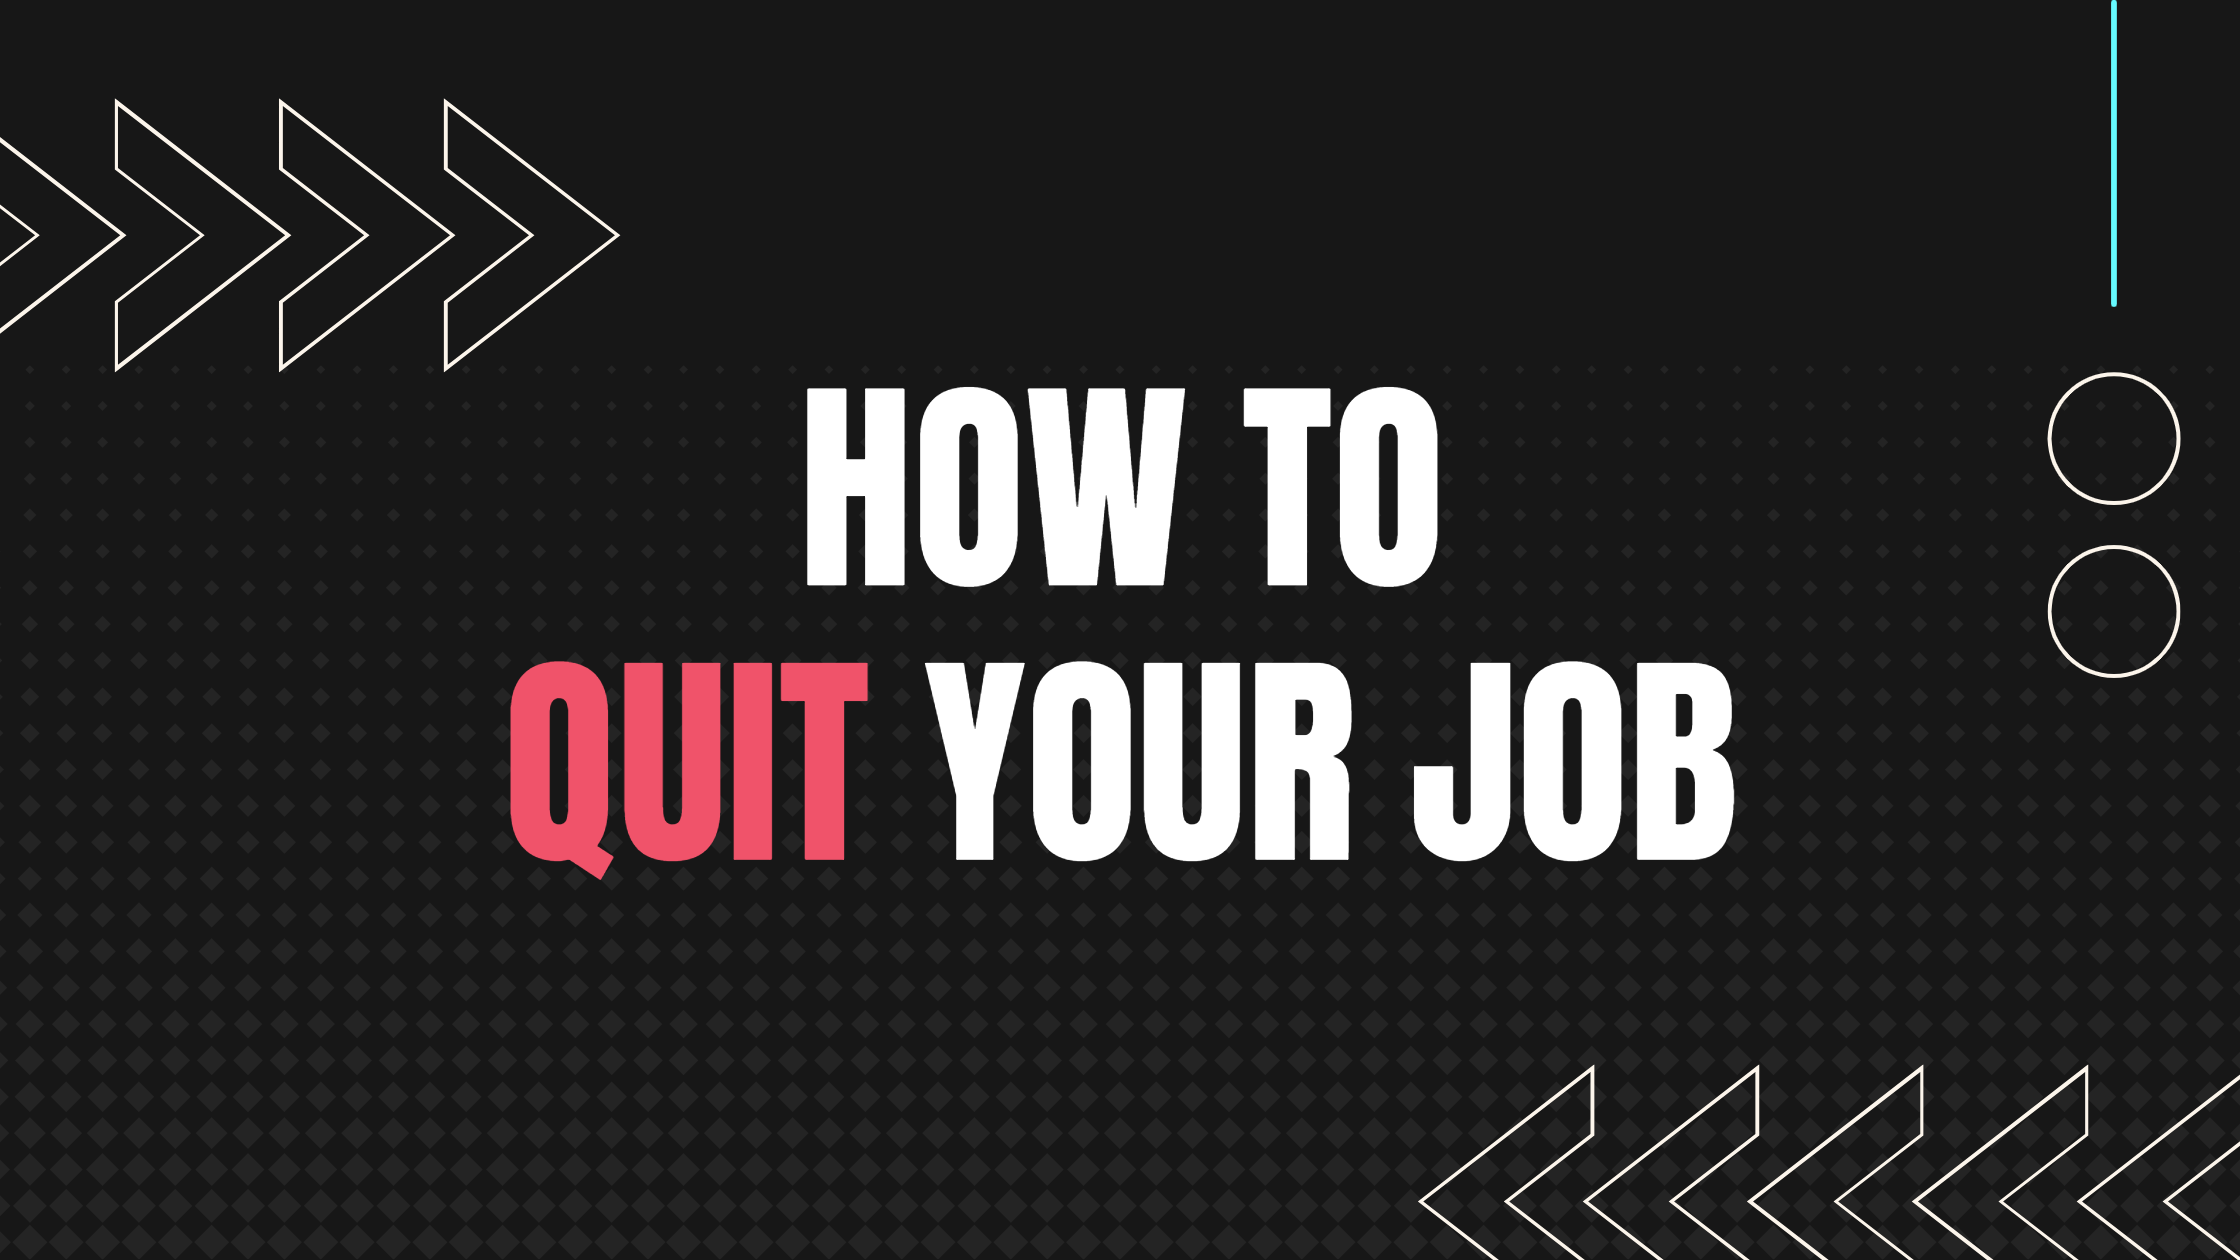 How to quit your job and feel good about it